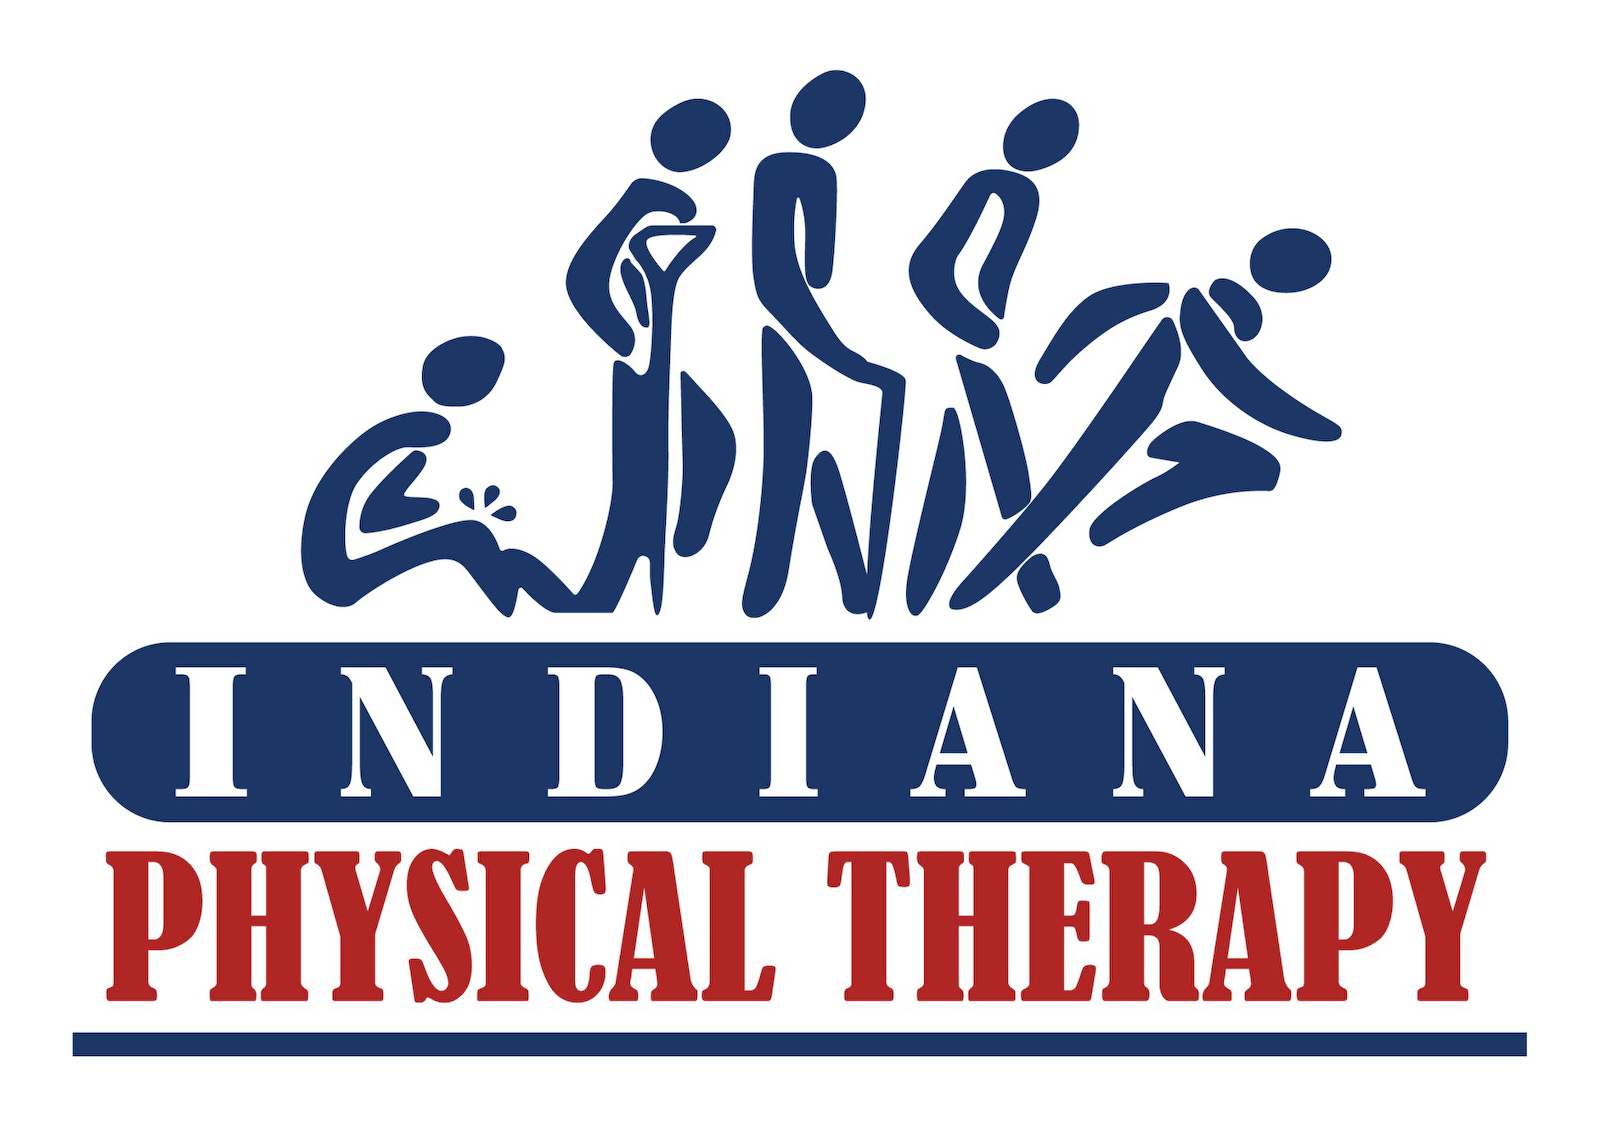 INDIANA PHYSICAL THERAPY